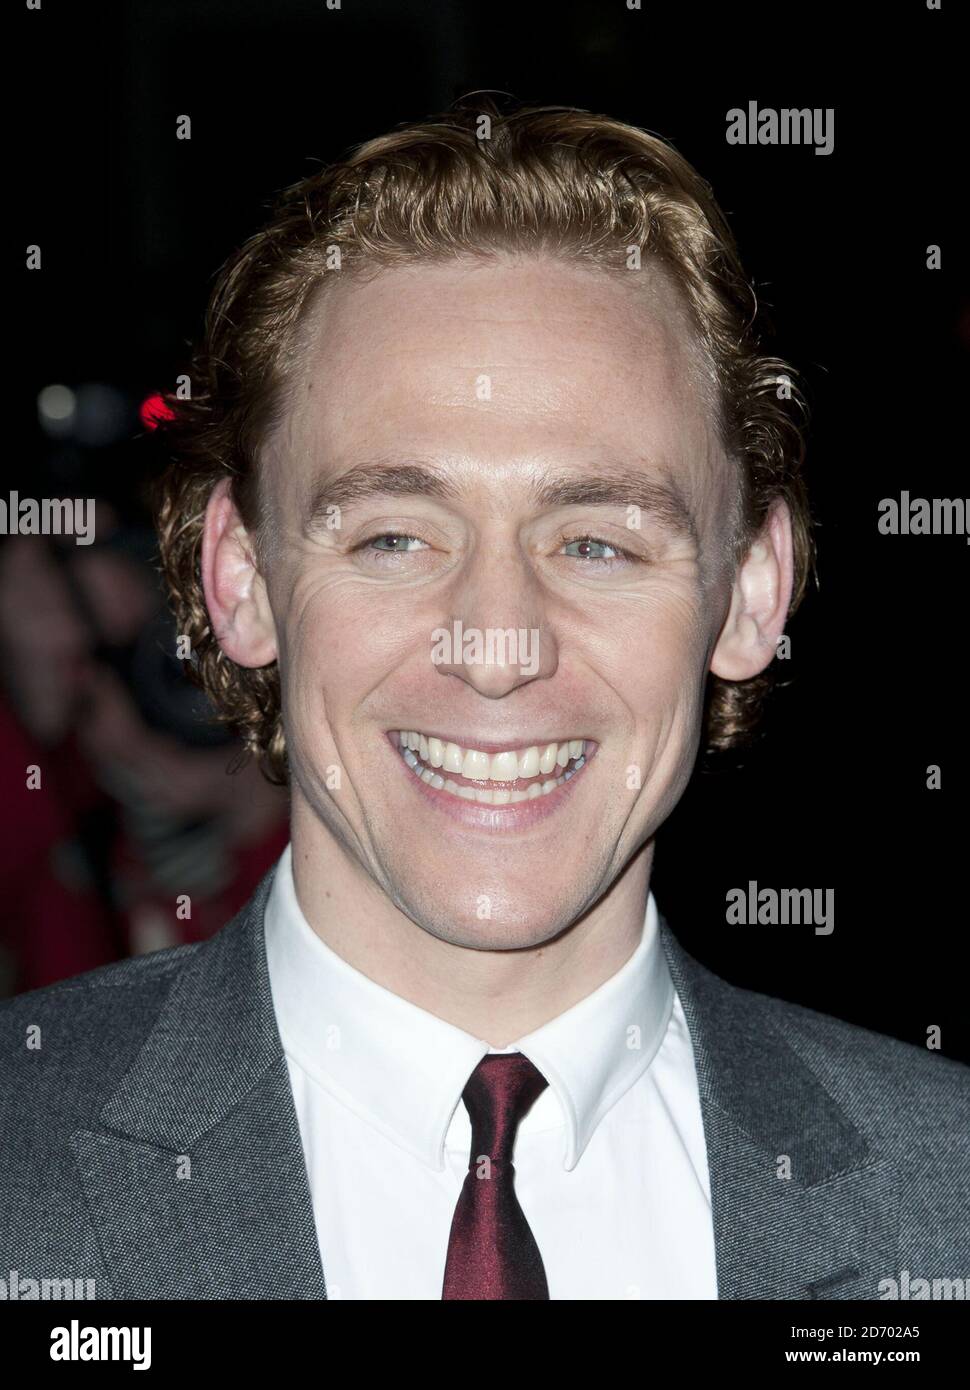 Tom Hiddleston arriving at the Evening Standard British Film Awards 2012, at the London Film Museum. Stock Photo